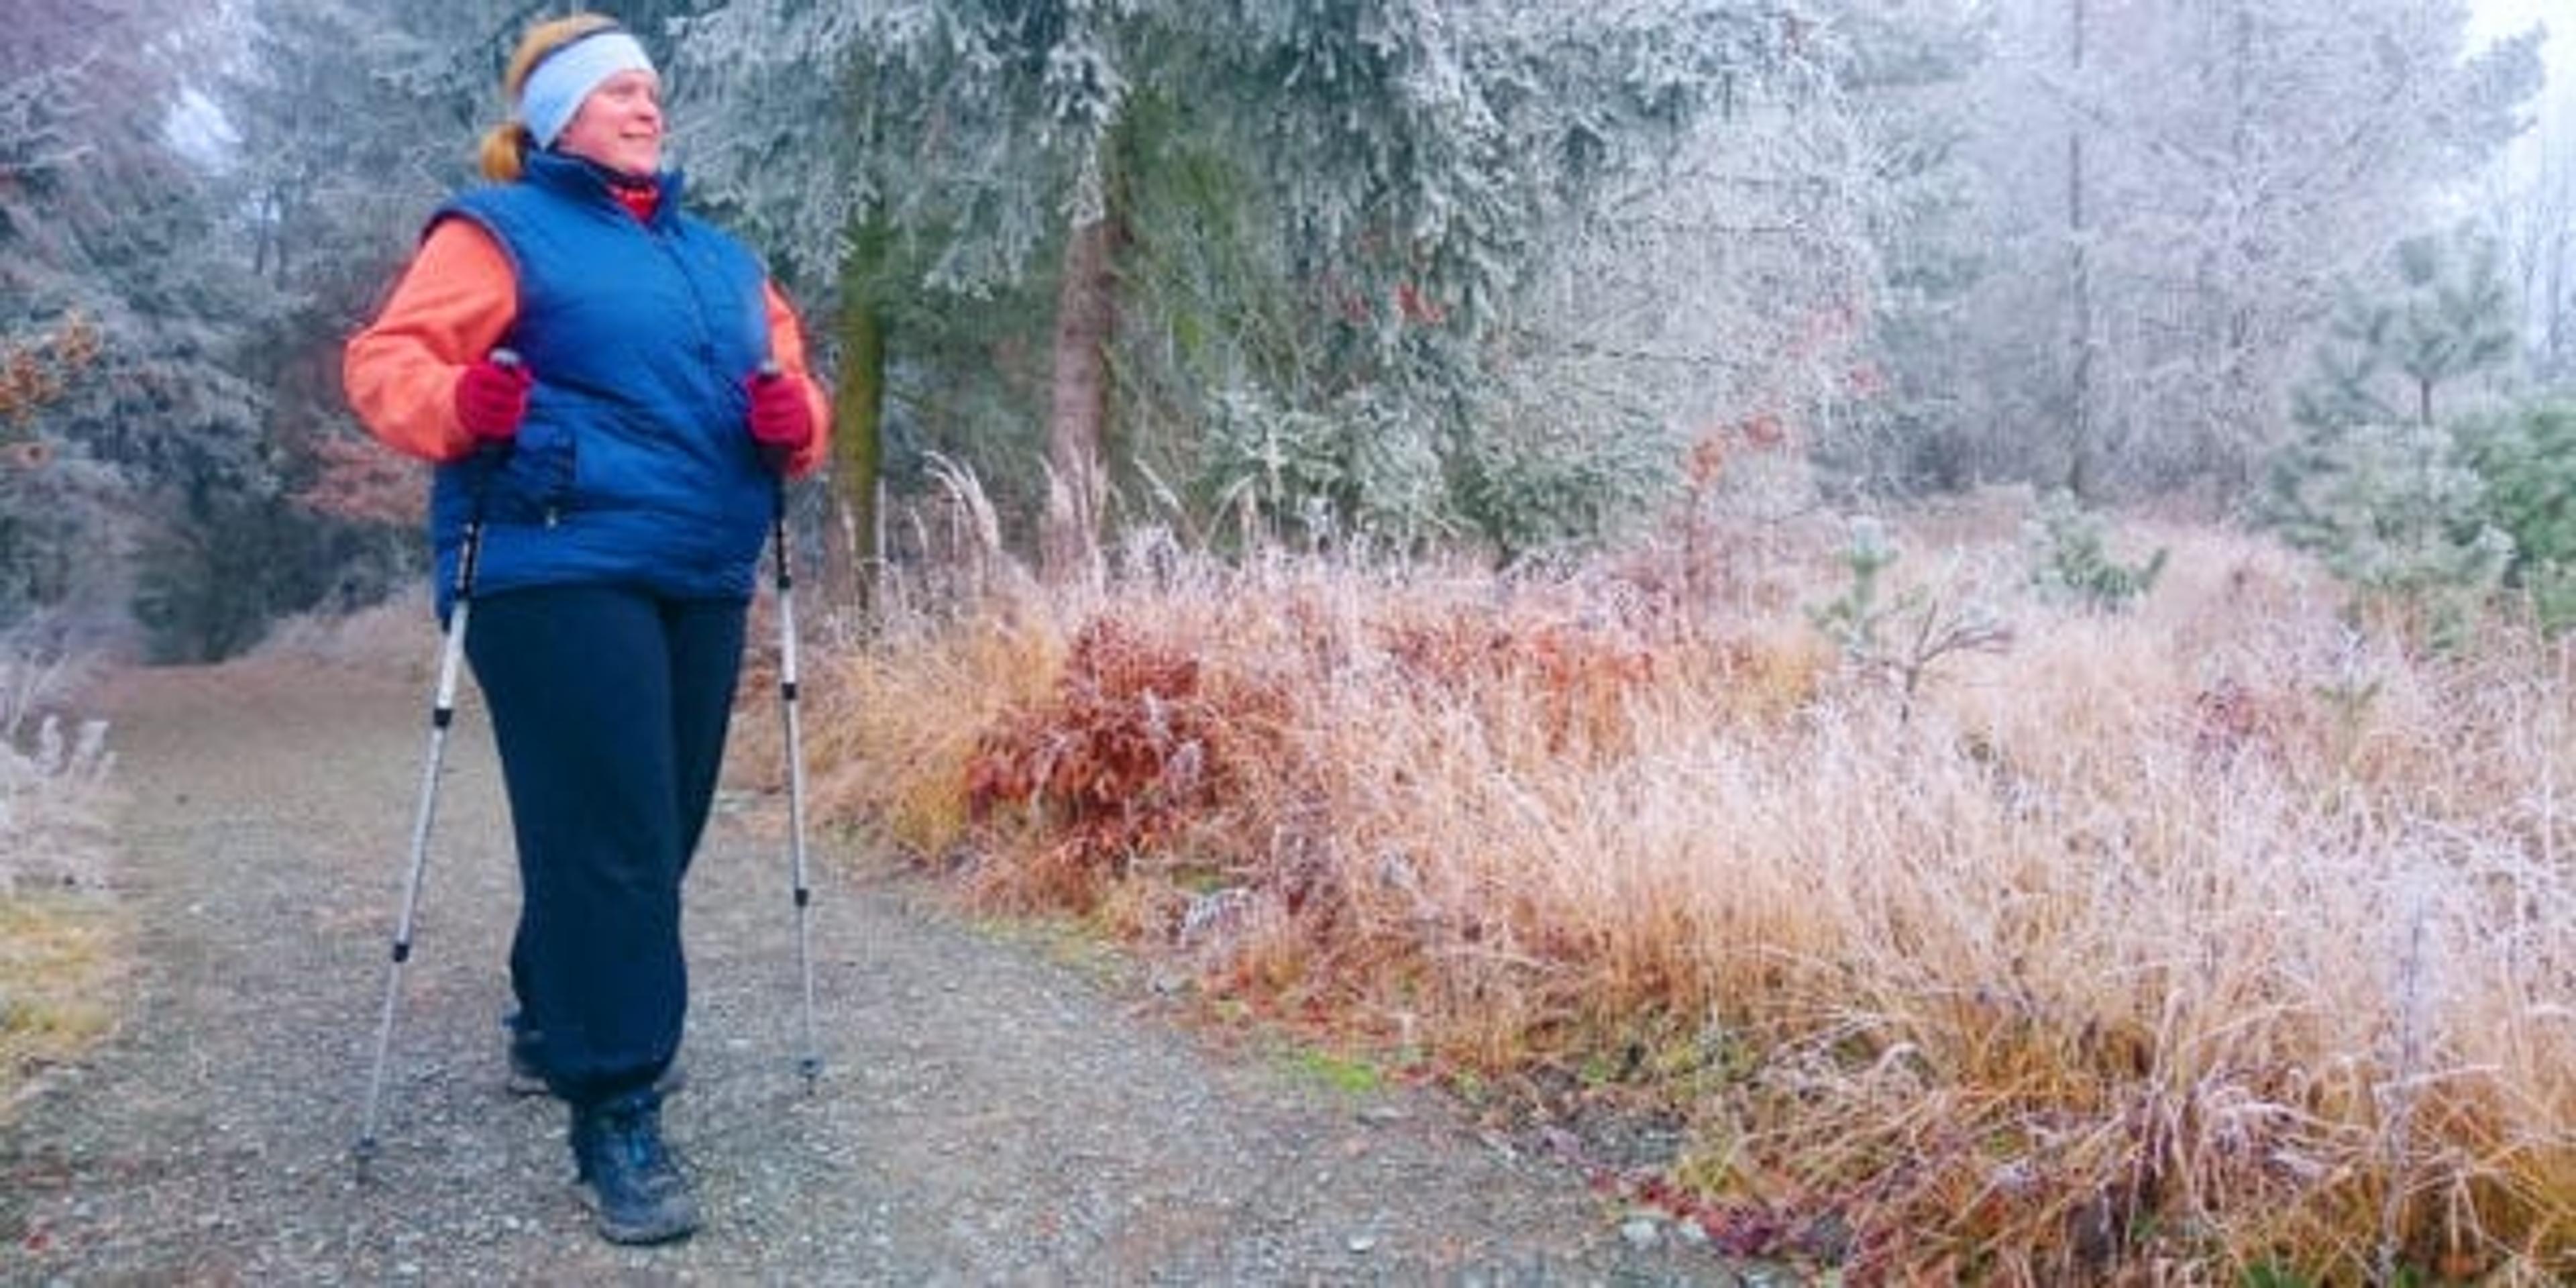 Overweight woman has done New Year resolution for weight loss in new year. Obese hiker walking on forest trail in winter cold weather. Nordic walking in Czech National Park Sumava.